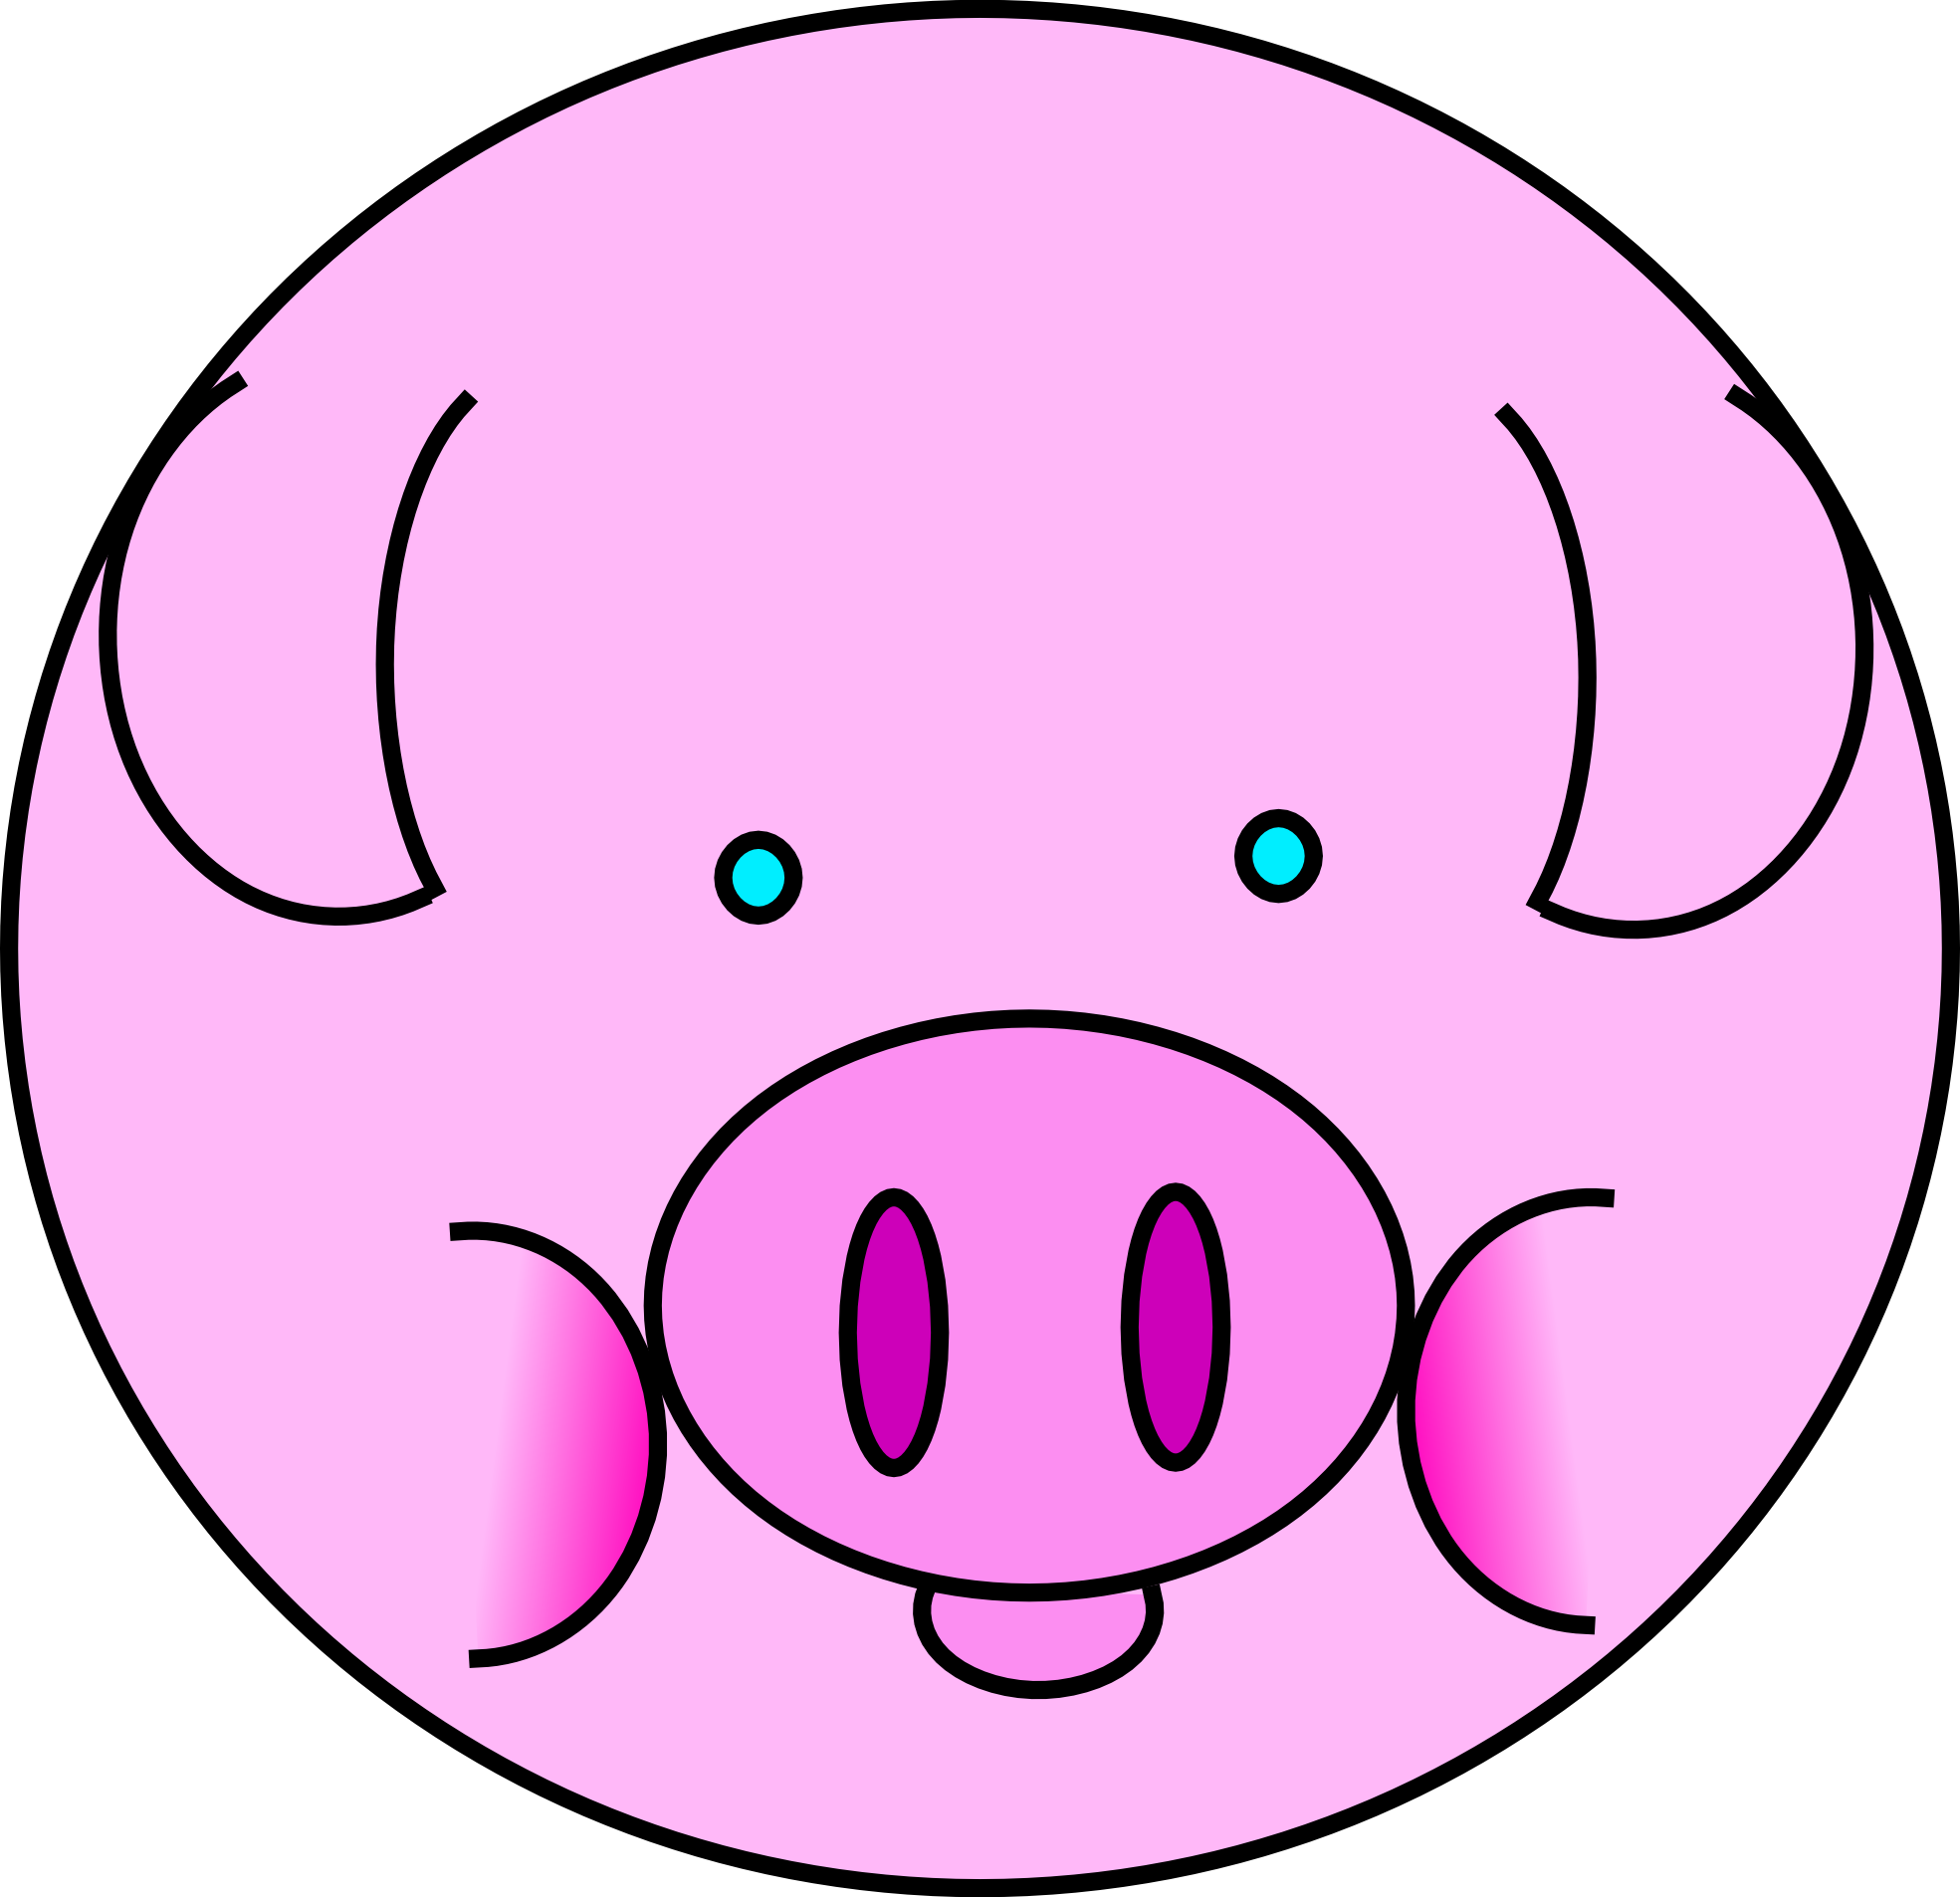 Pig clipart free images 5